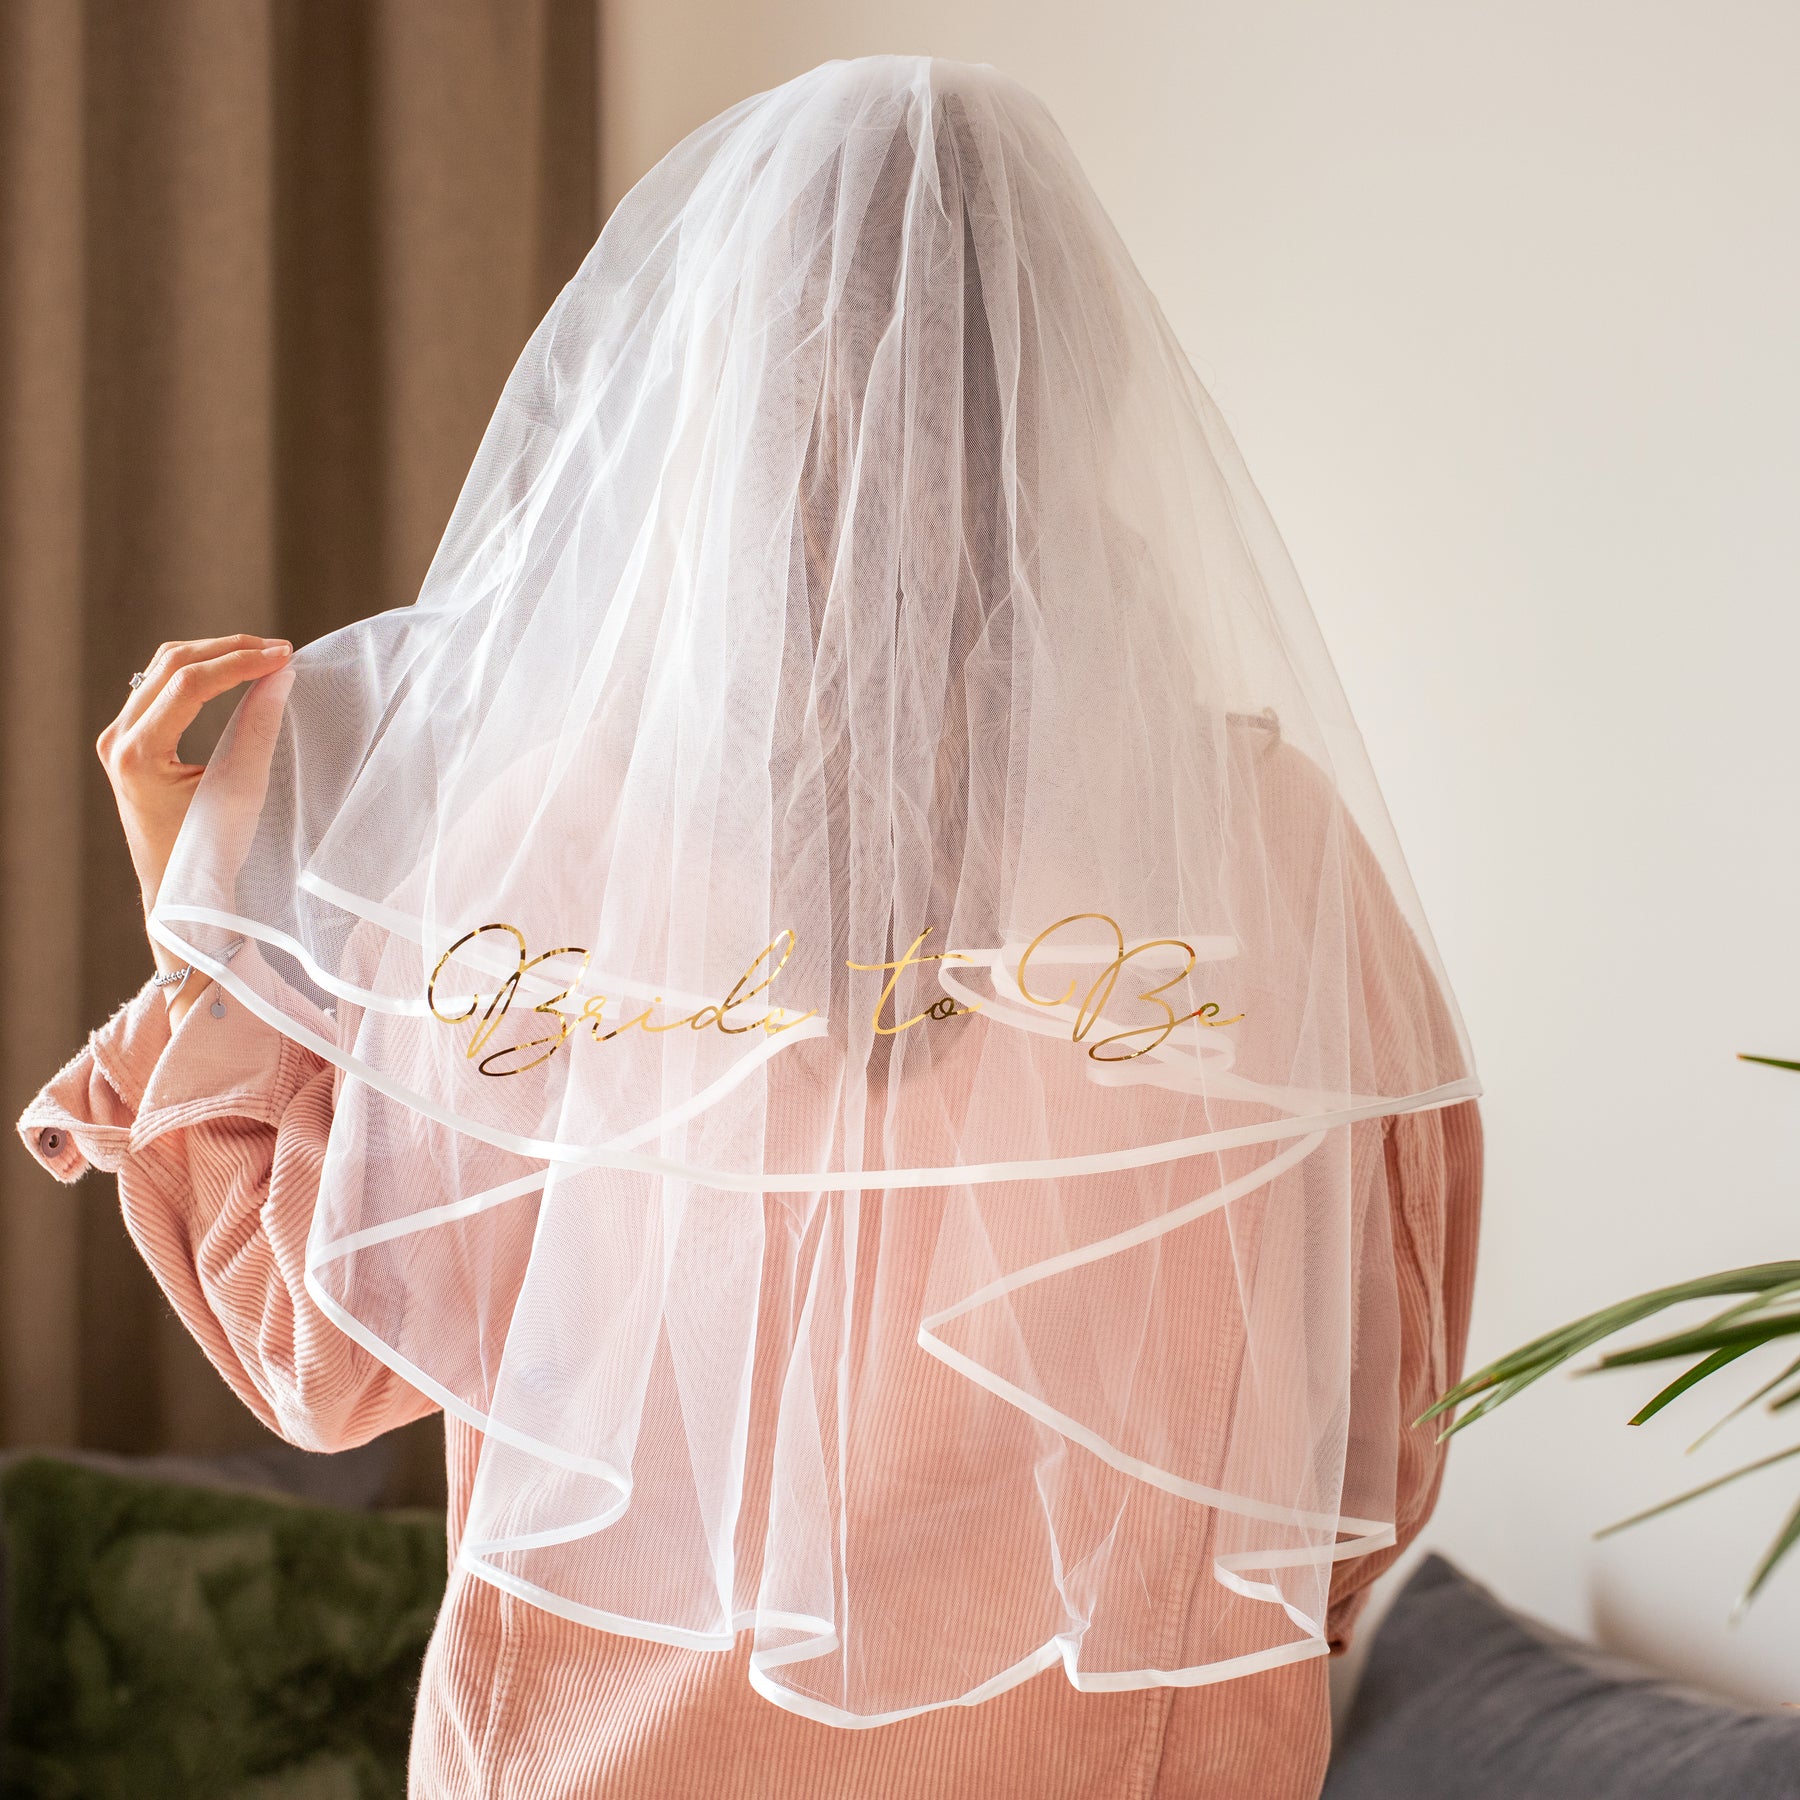 Personalised Hen Party Veil